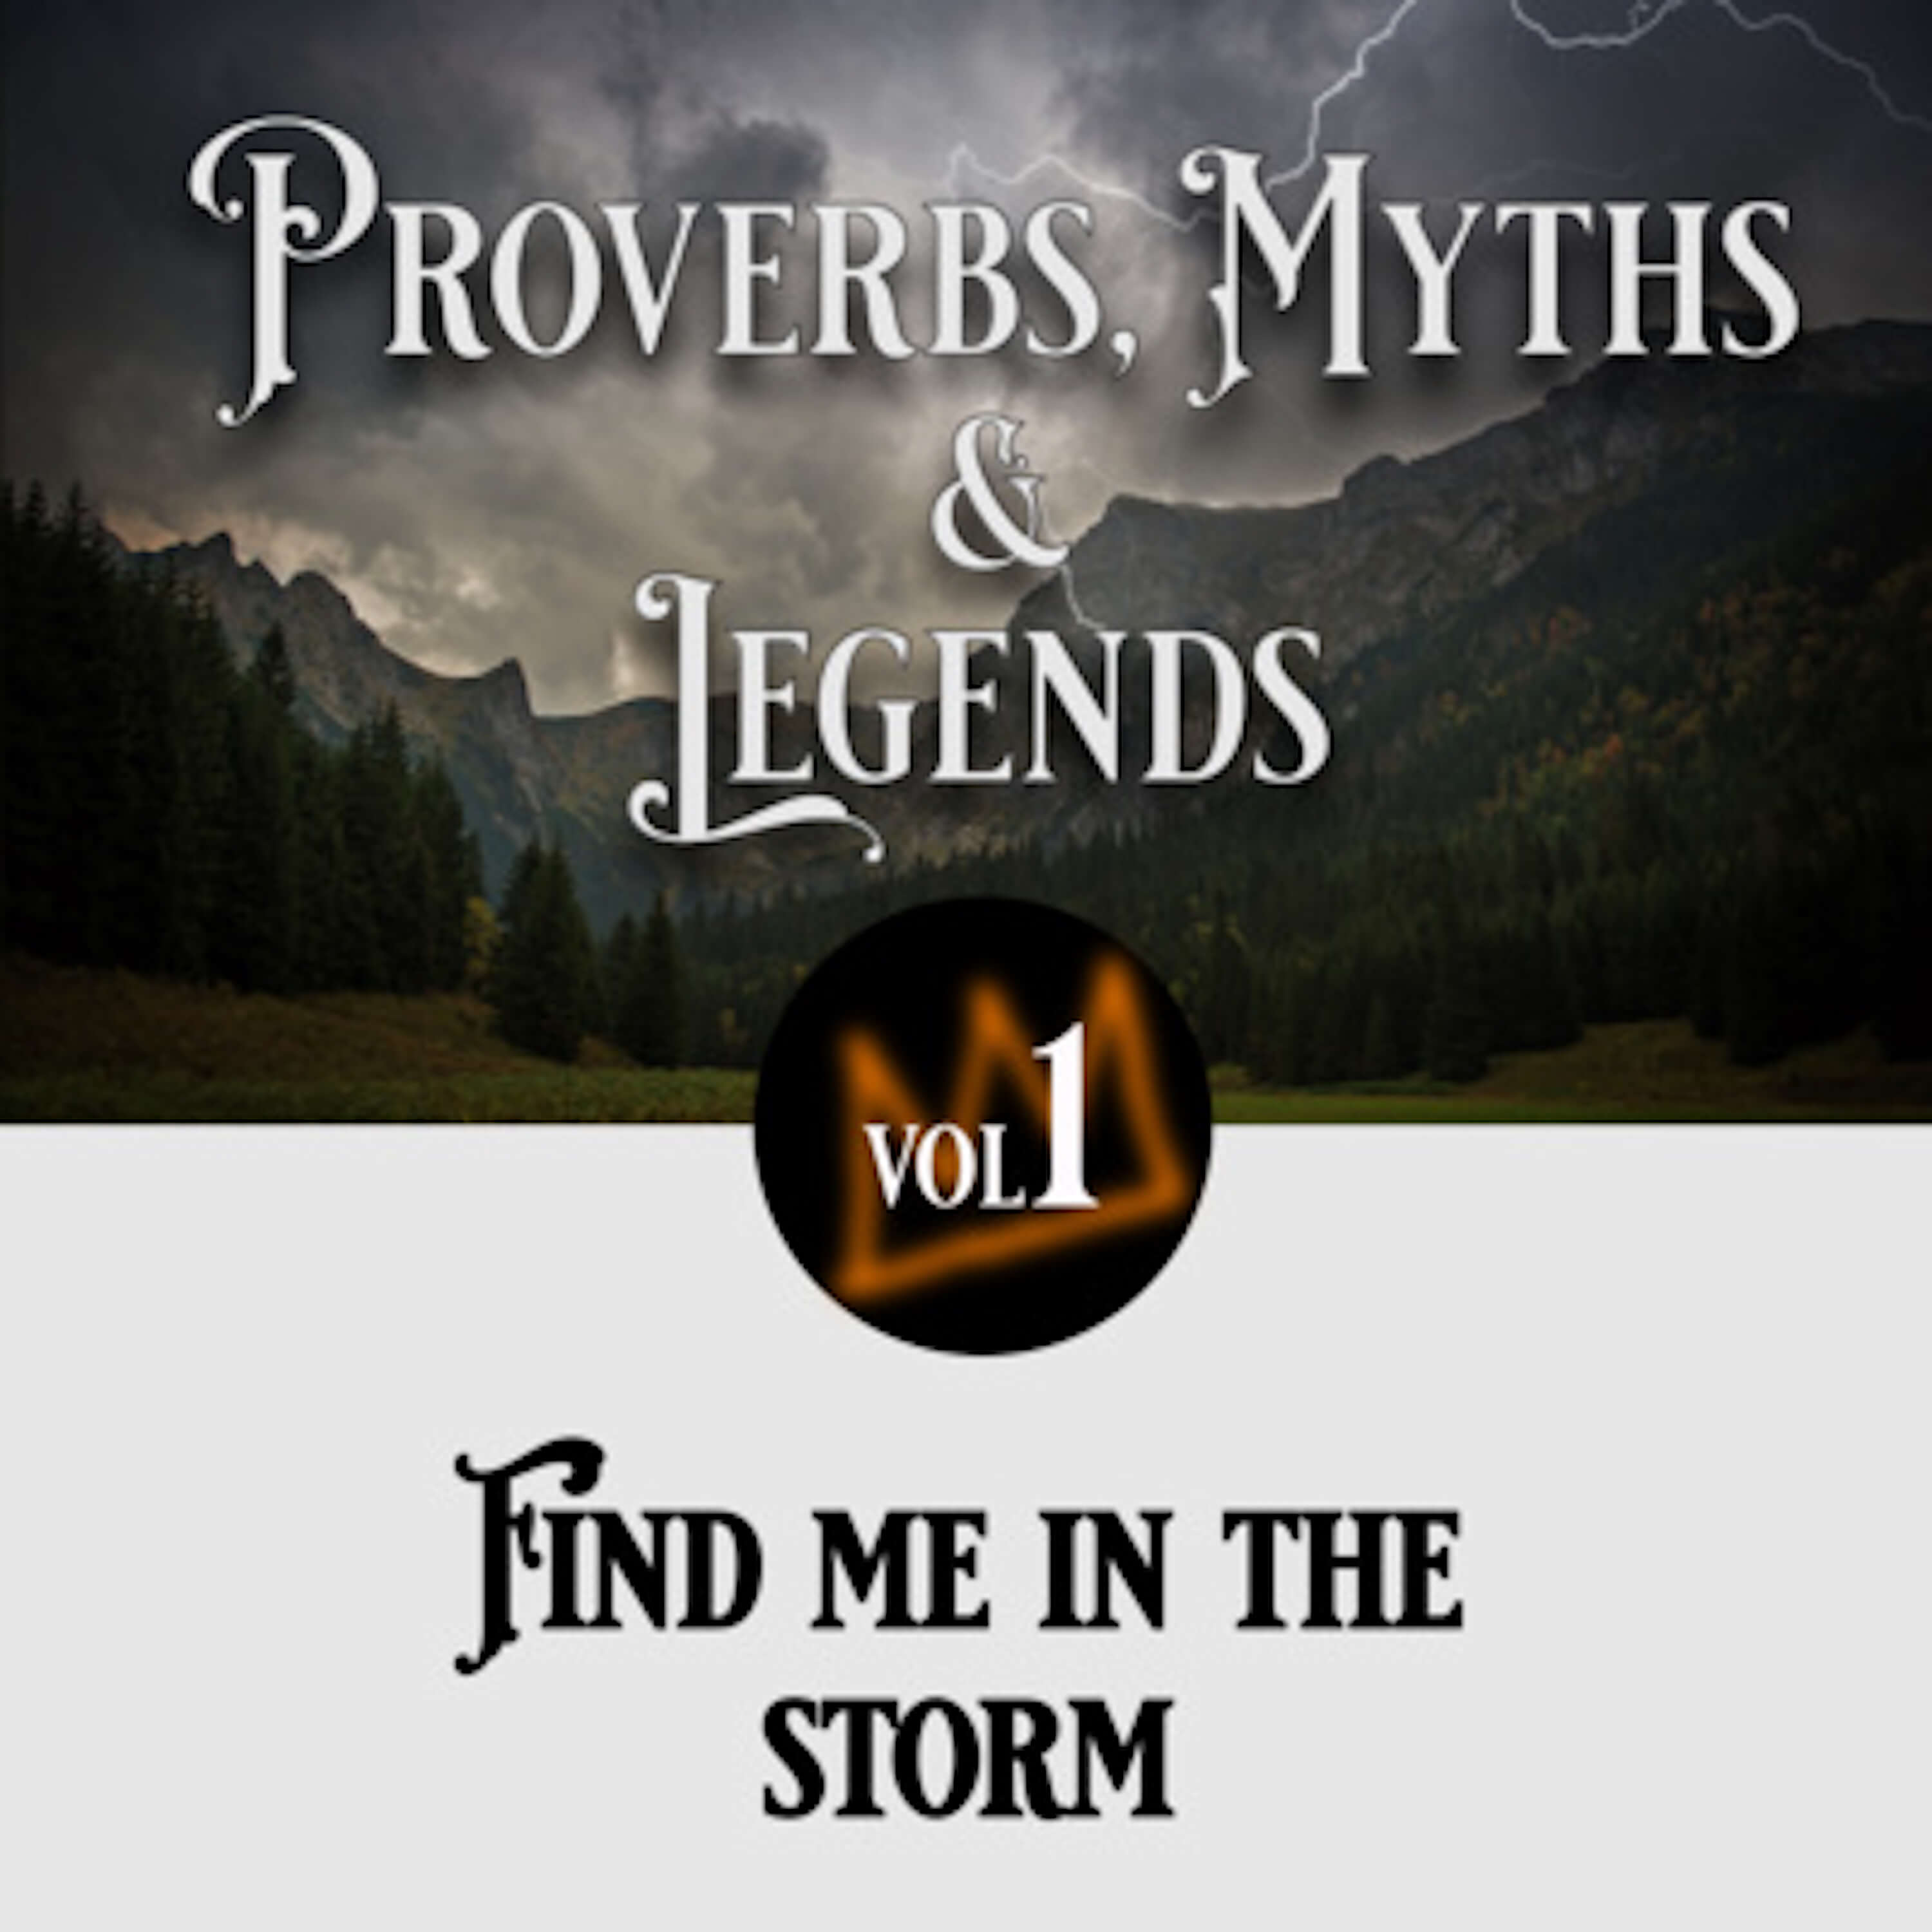 25: Proverbs, myths and legends: Find me in the storm